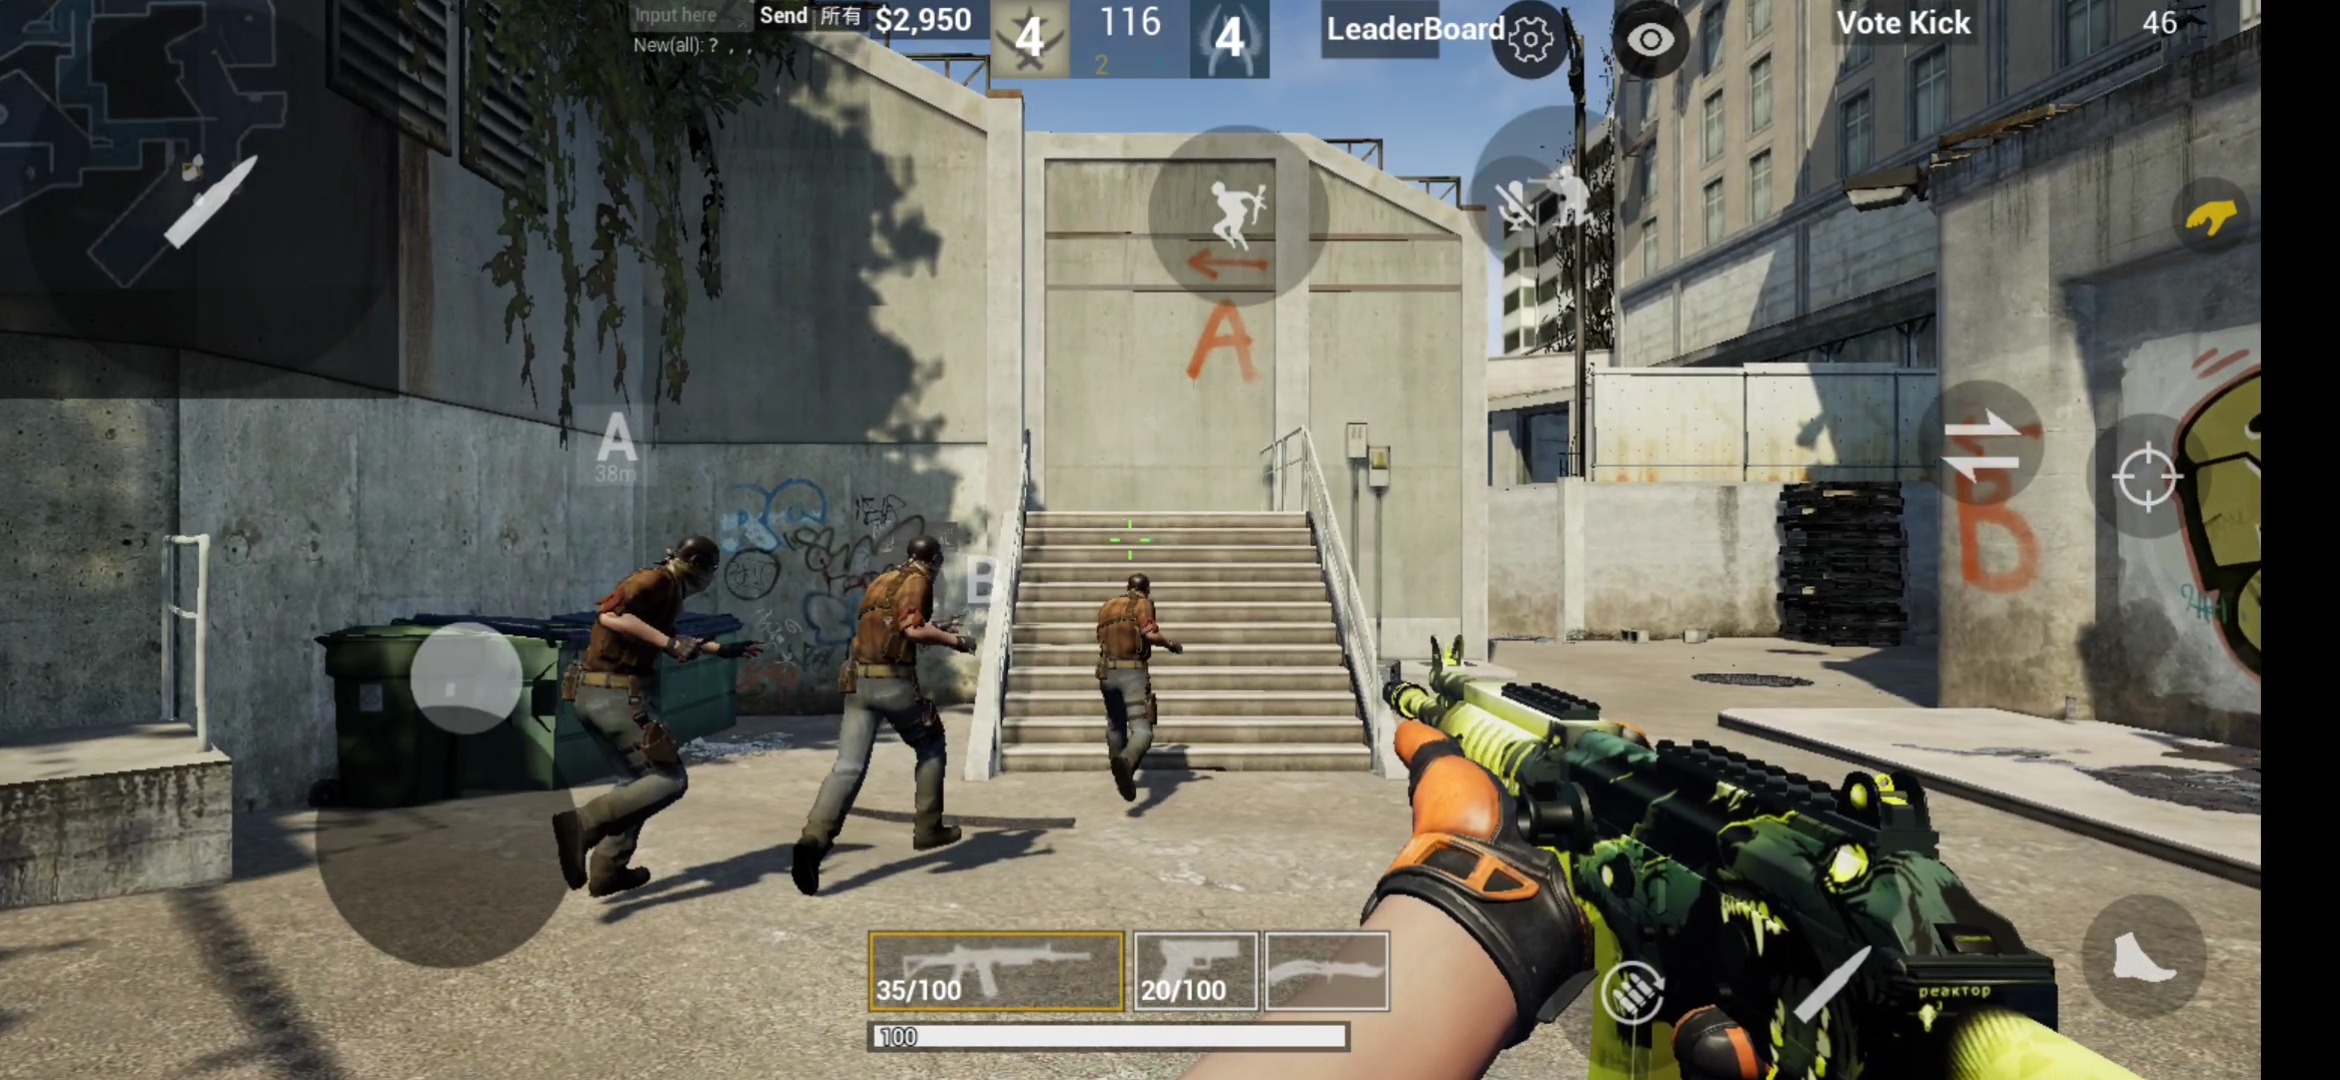 Download Counter-Strike: Global Offensive MOD APK vv22-CSMGO (unlock all  skins) For Android